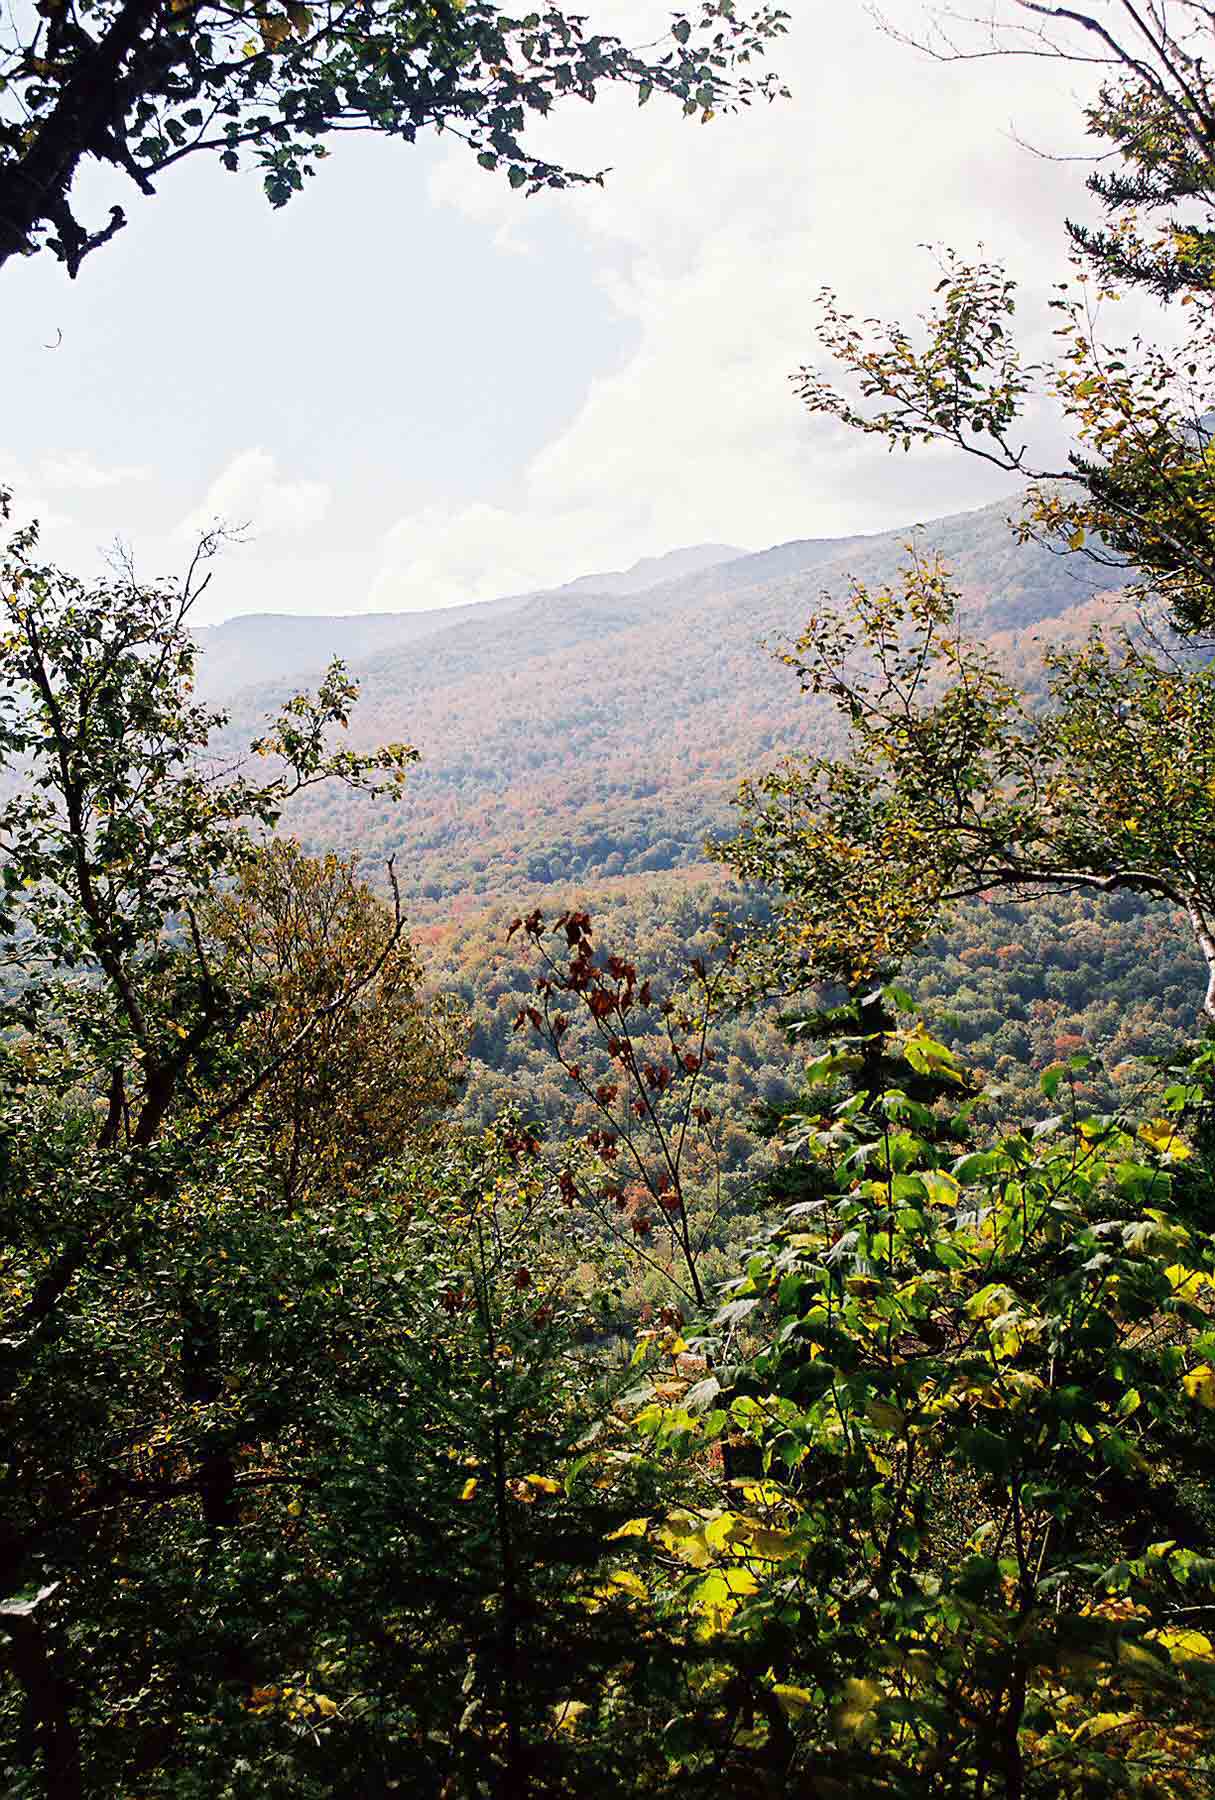 mm 21.5 - Looking from Ben's Balcony viewpoint located between VT 100 and the junction with the Sherburne Pass Trail. The summit of Killington can be seen. Courtesy dlcul@conncoll.edu